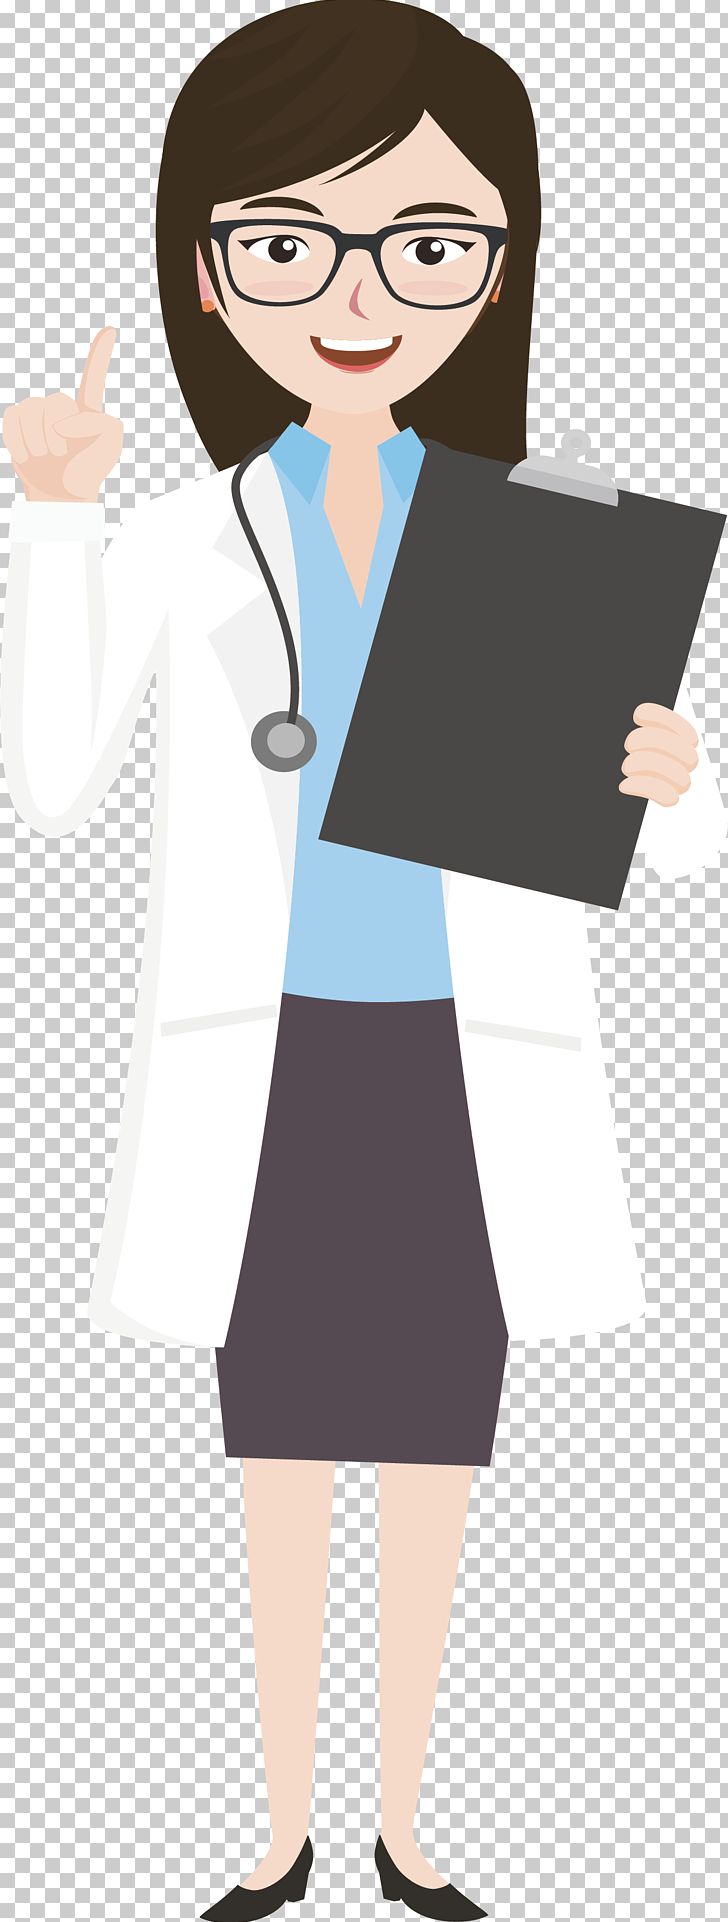 Glasses Physician Woman PNG, Clipart, Business, Business Woman, Cartoon,  Communication, Doctor Free PNG Download